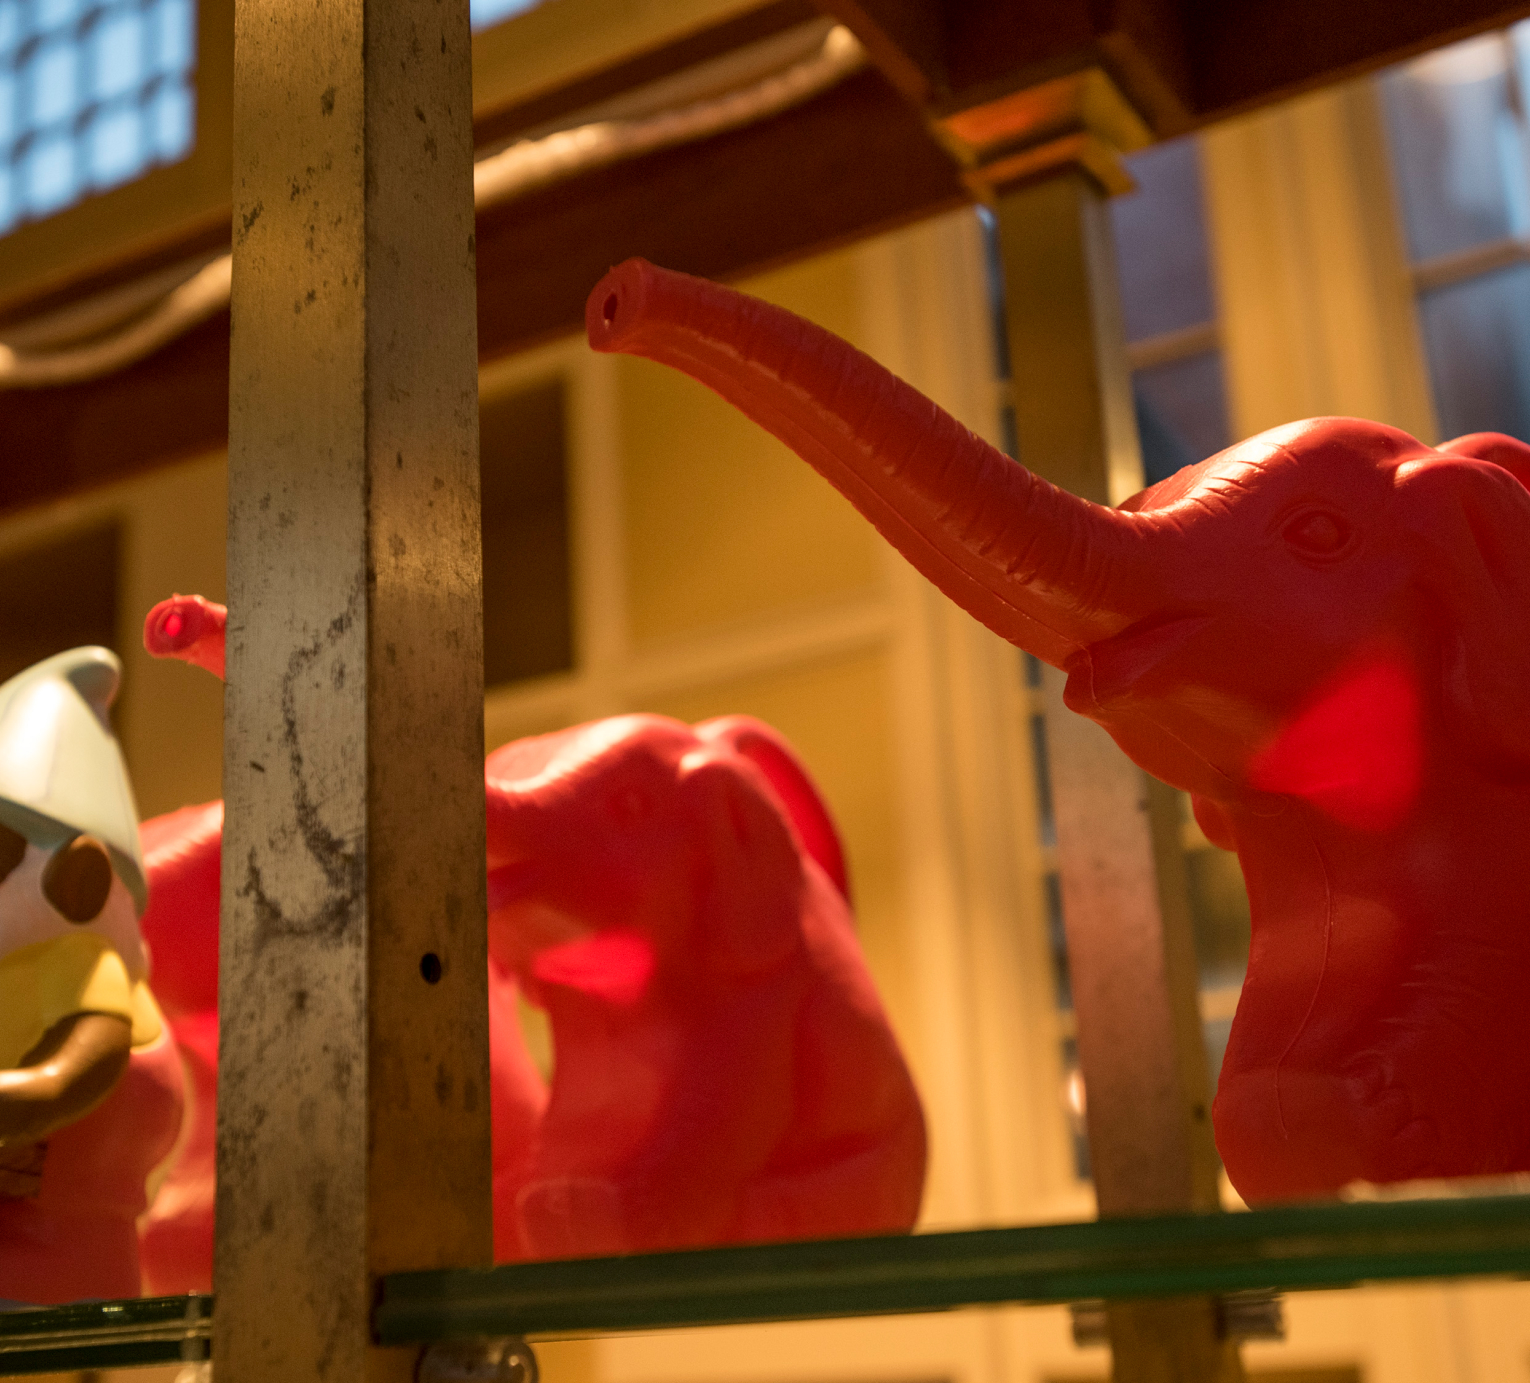 Gift shop display of pink elephant watering cans and a small garden gnome